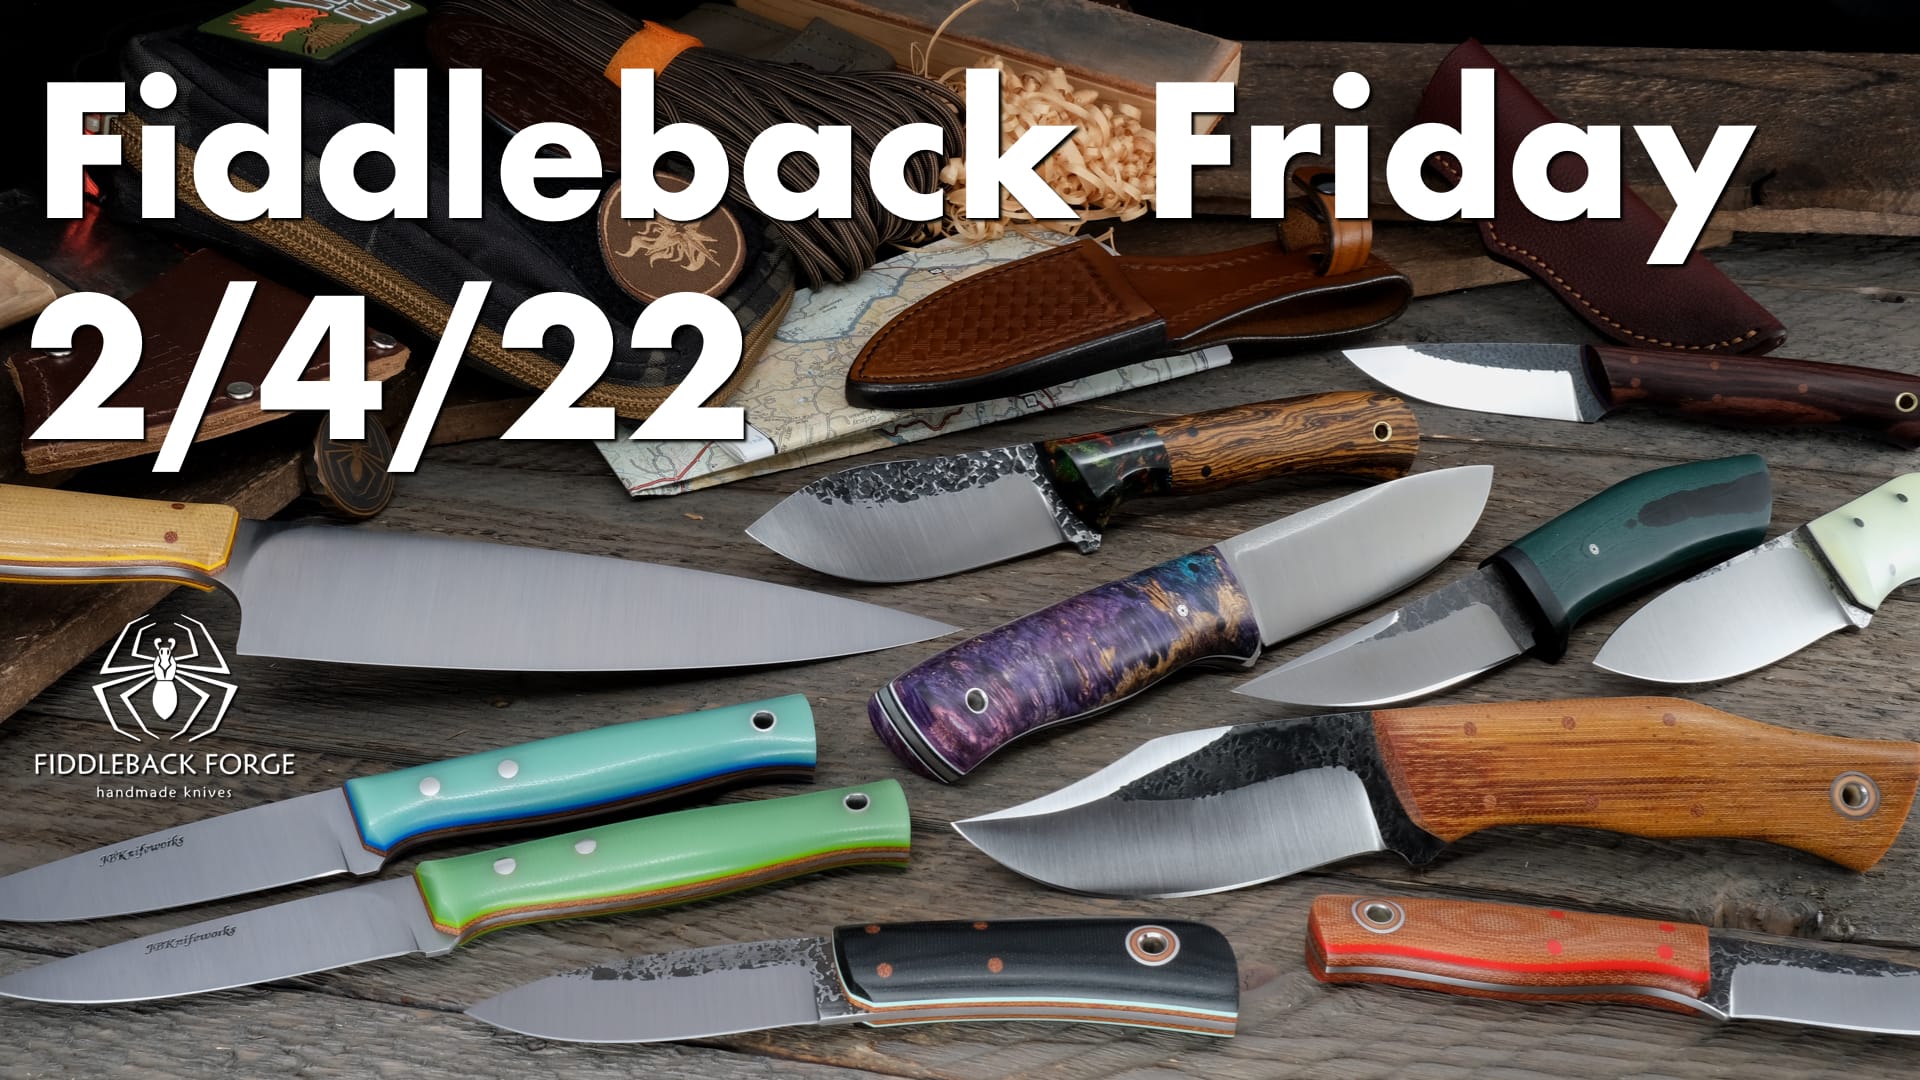 Fiddleback Friday 2/4/22 - Video Preview